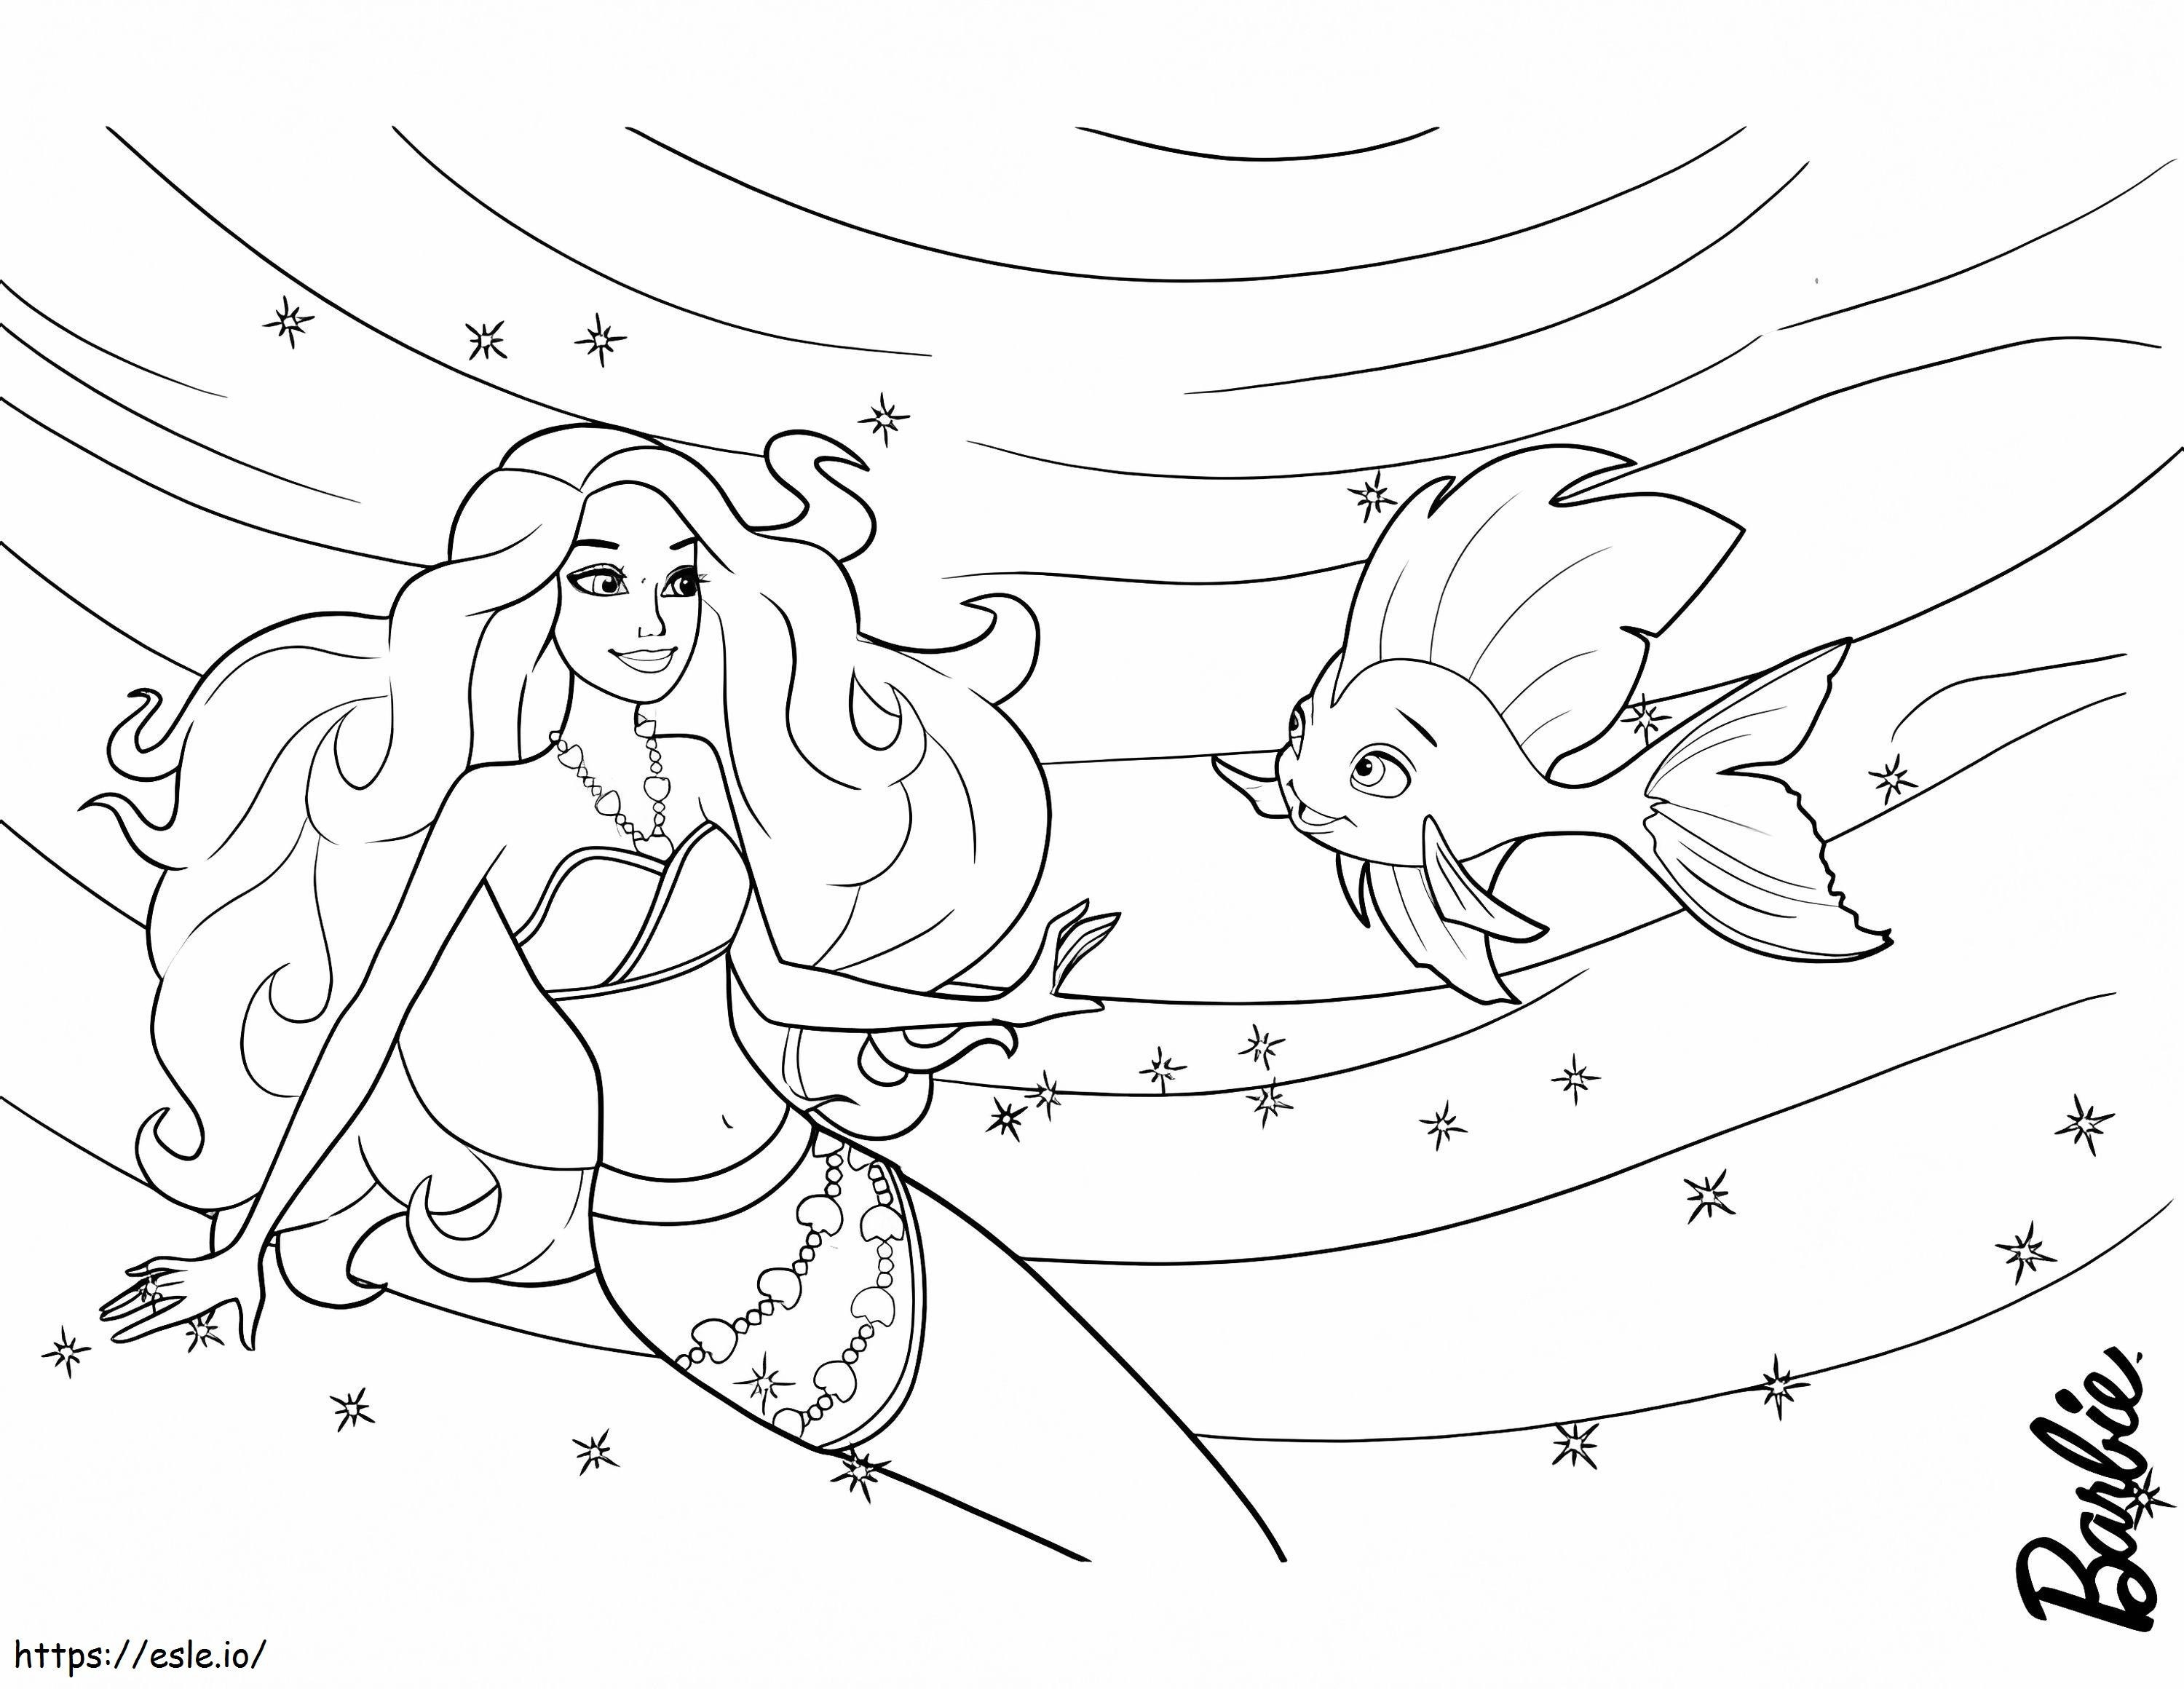 Barbie Mermaid And Fish Friend coloring page